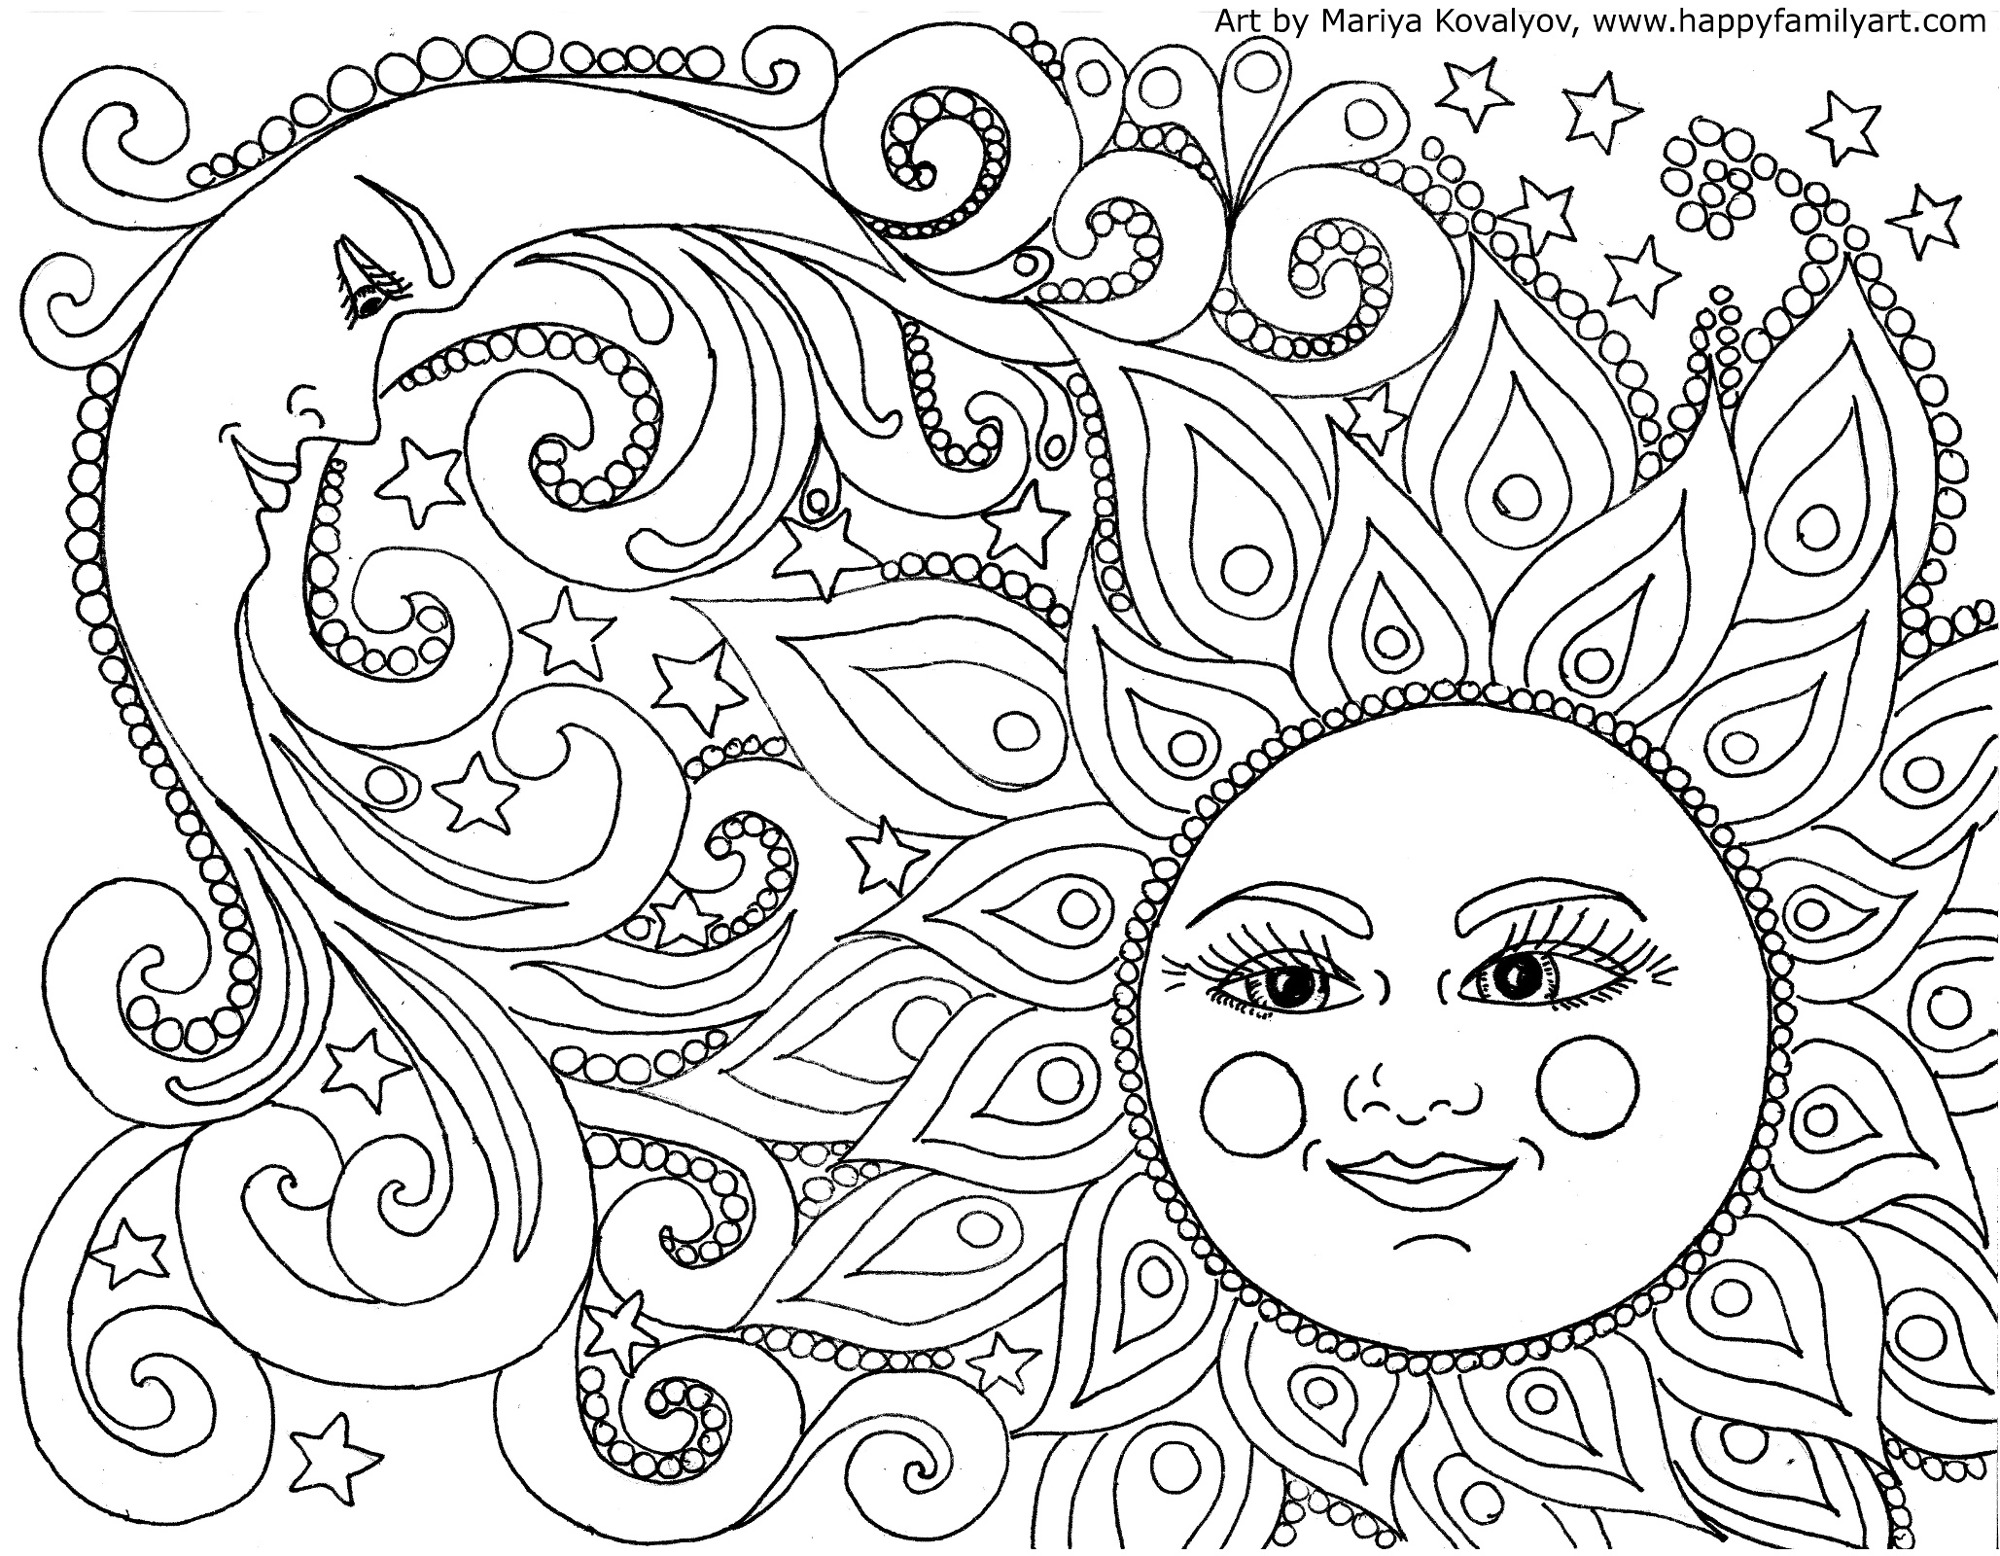 Mond coloring #15, Download drawings